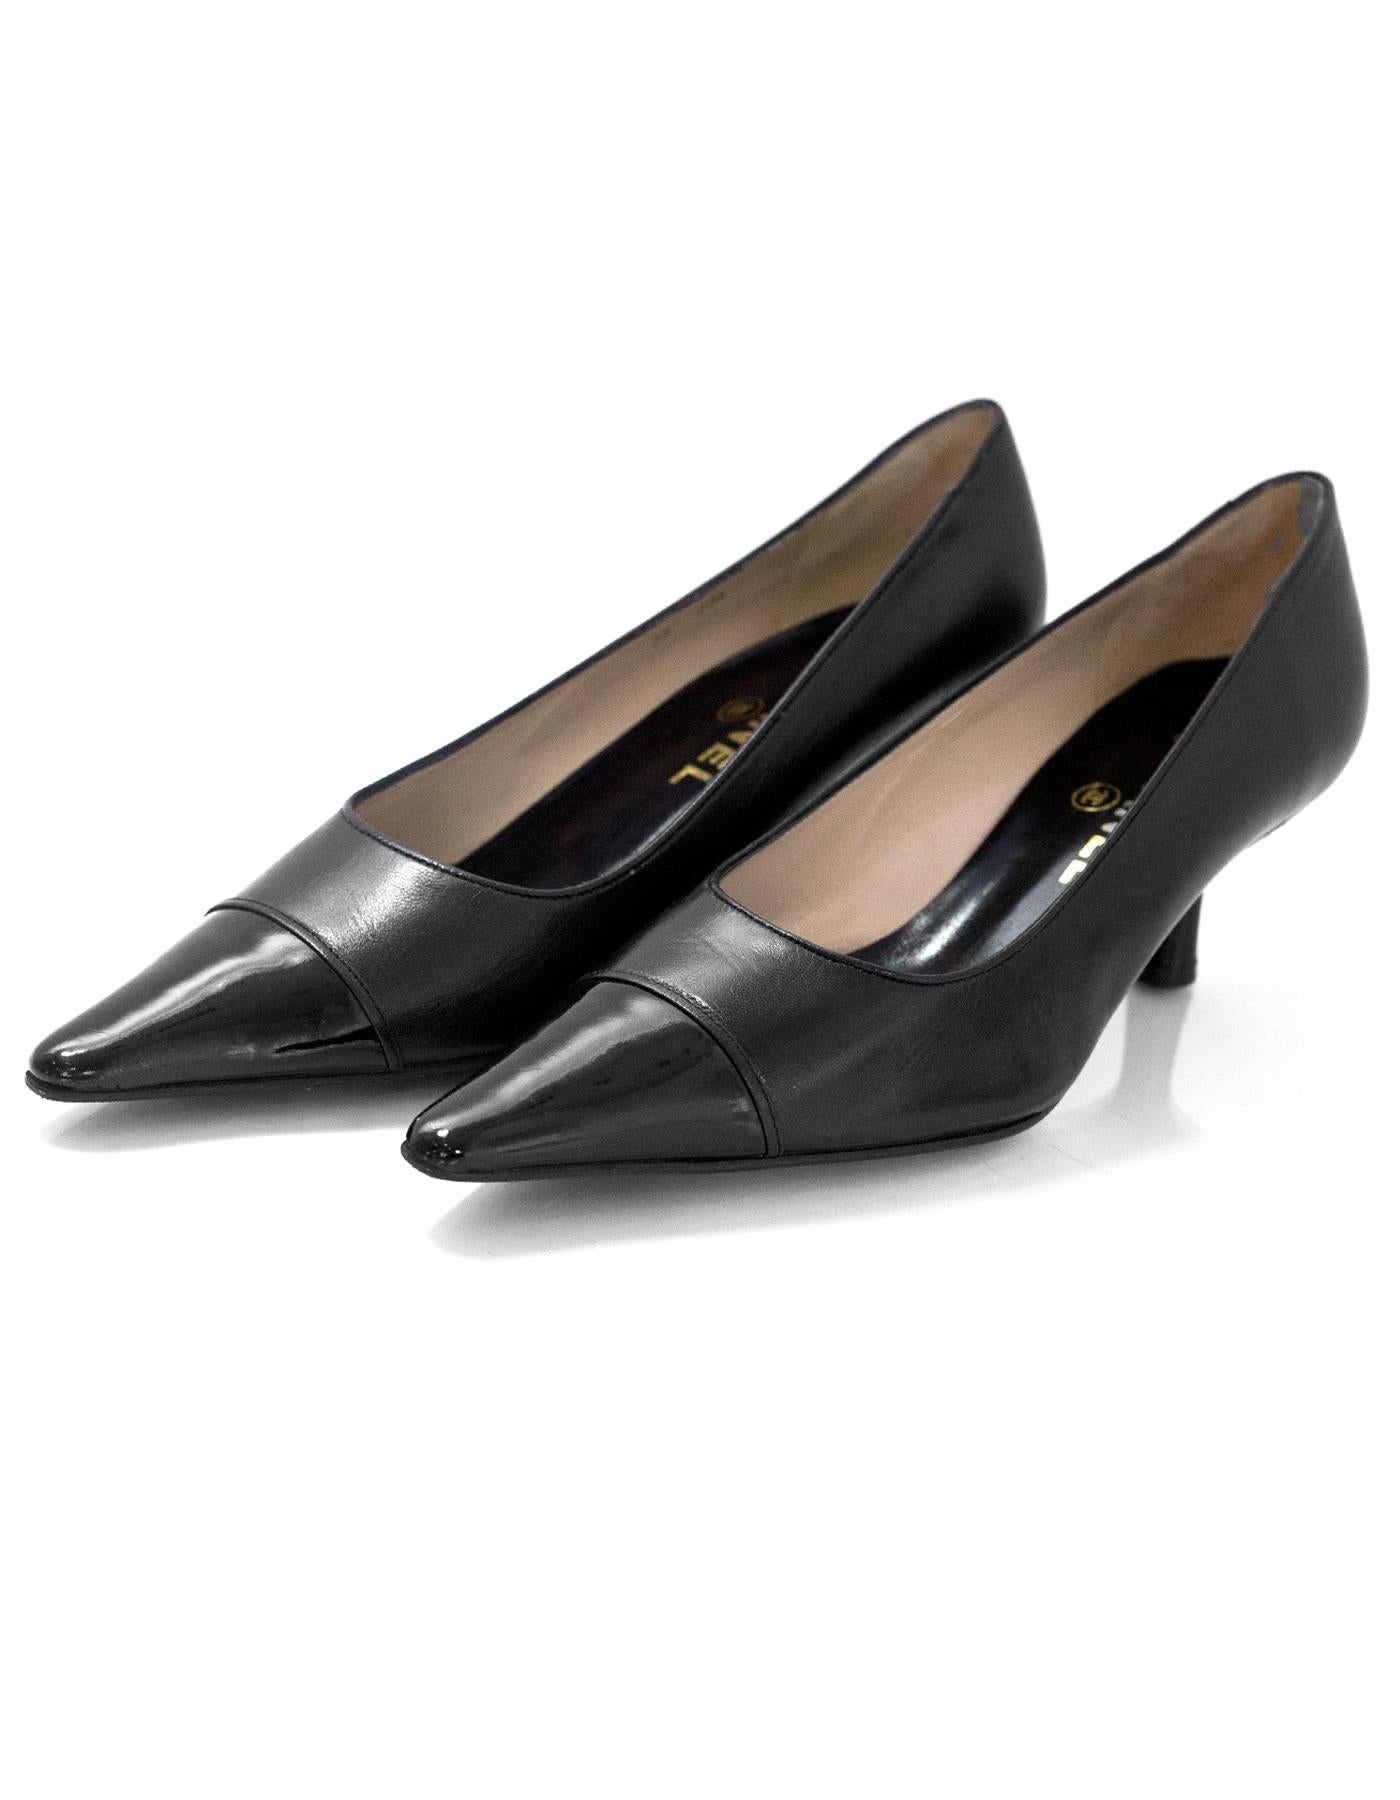 Chanel Black Leather Pointed Toe Kitten Heels 
Features patent toe cap

Made In: France
Color: Black
Materials: Leather and patent leather
Closure/Opening: Slip on
Sole Stamp: CC Made in France 38
Overall Condition: Excellent pre-owned condition